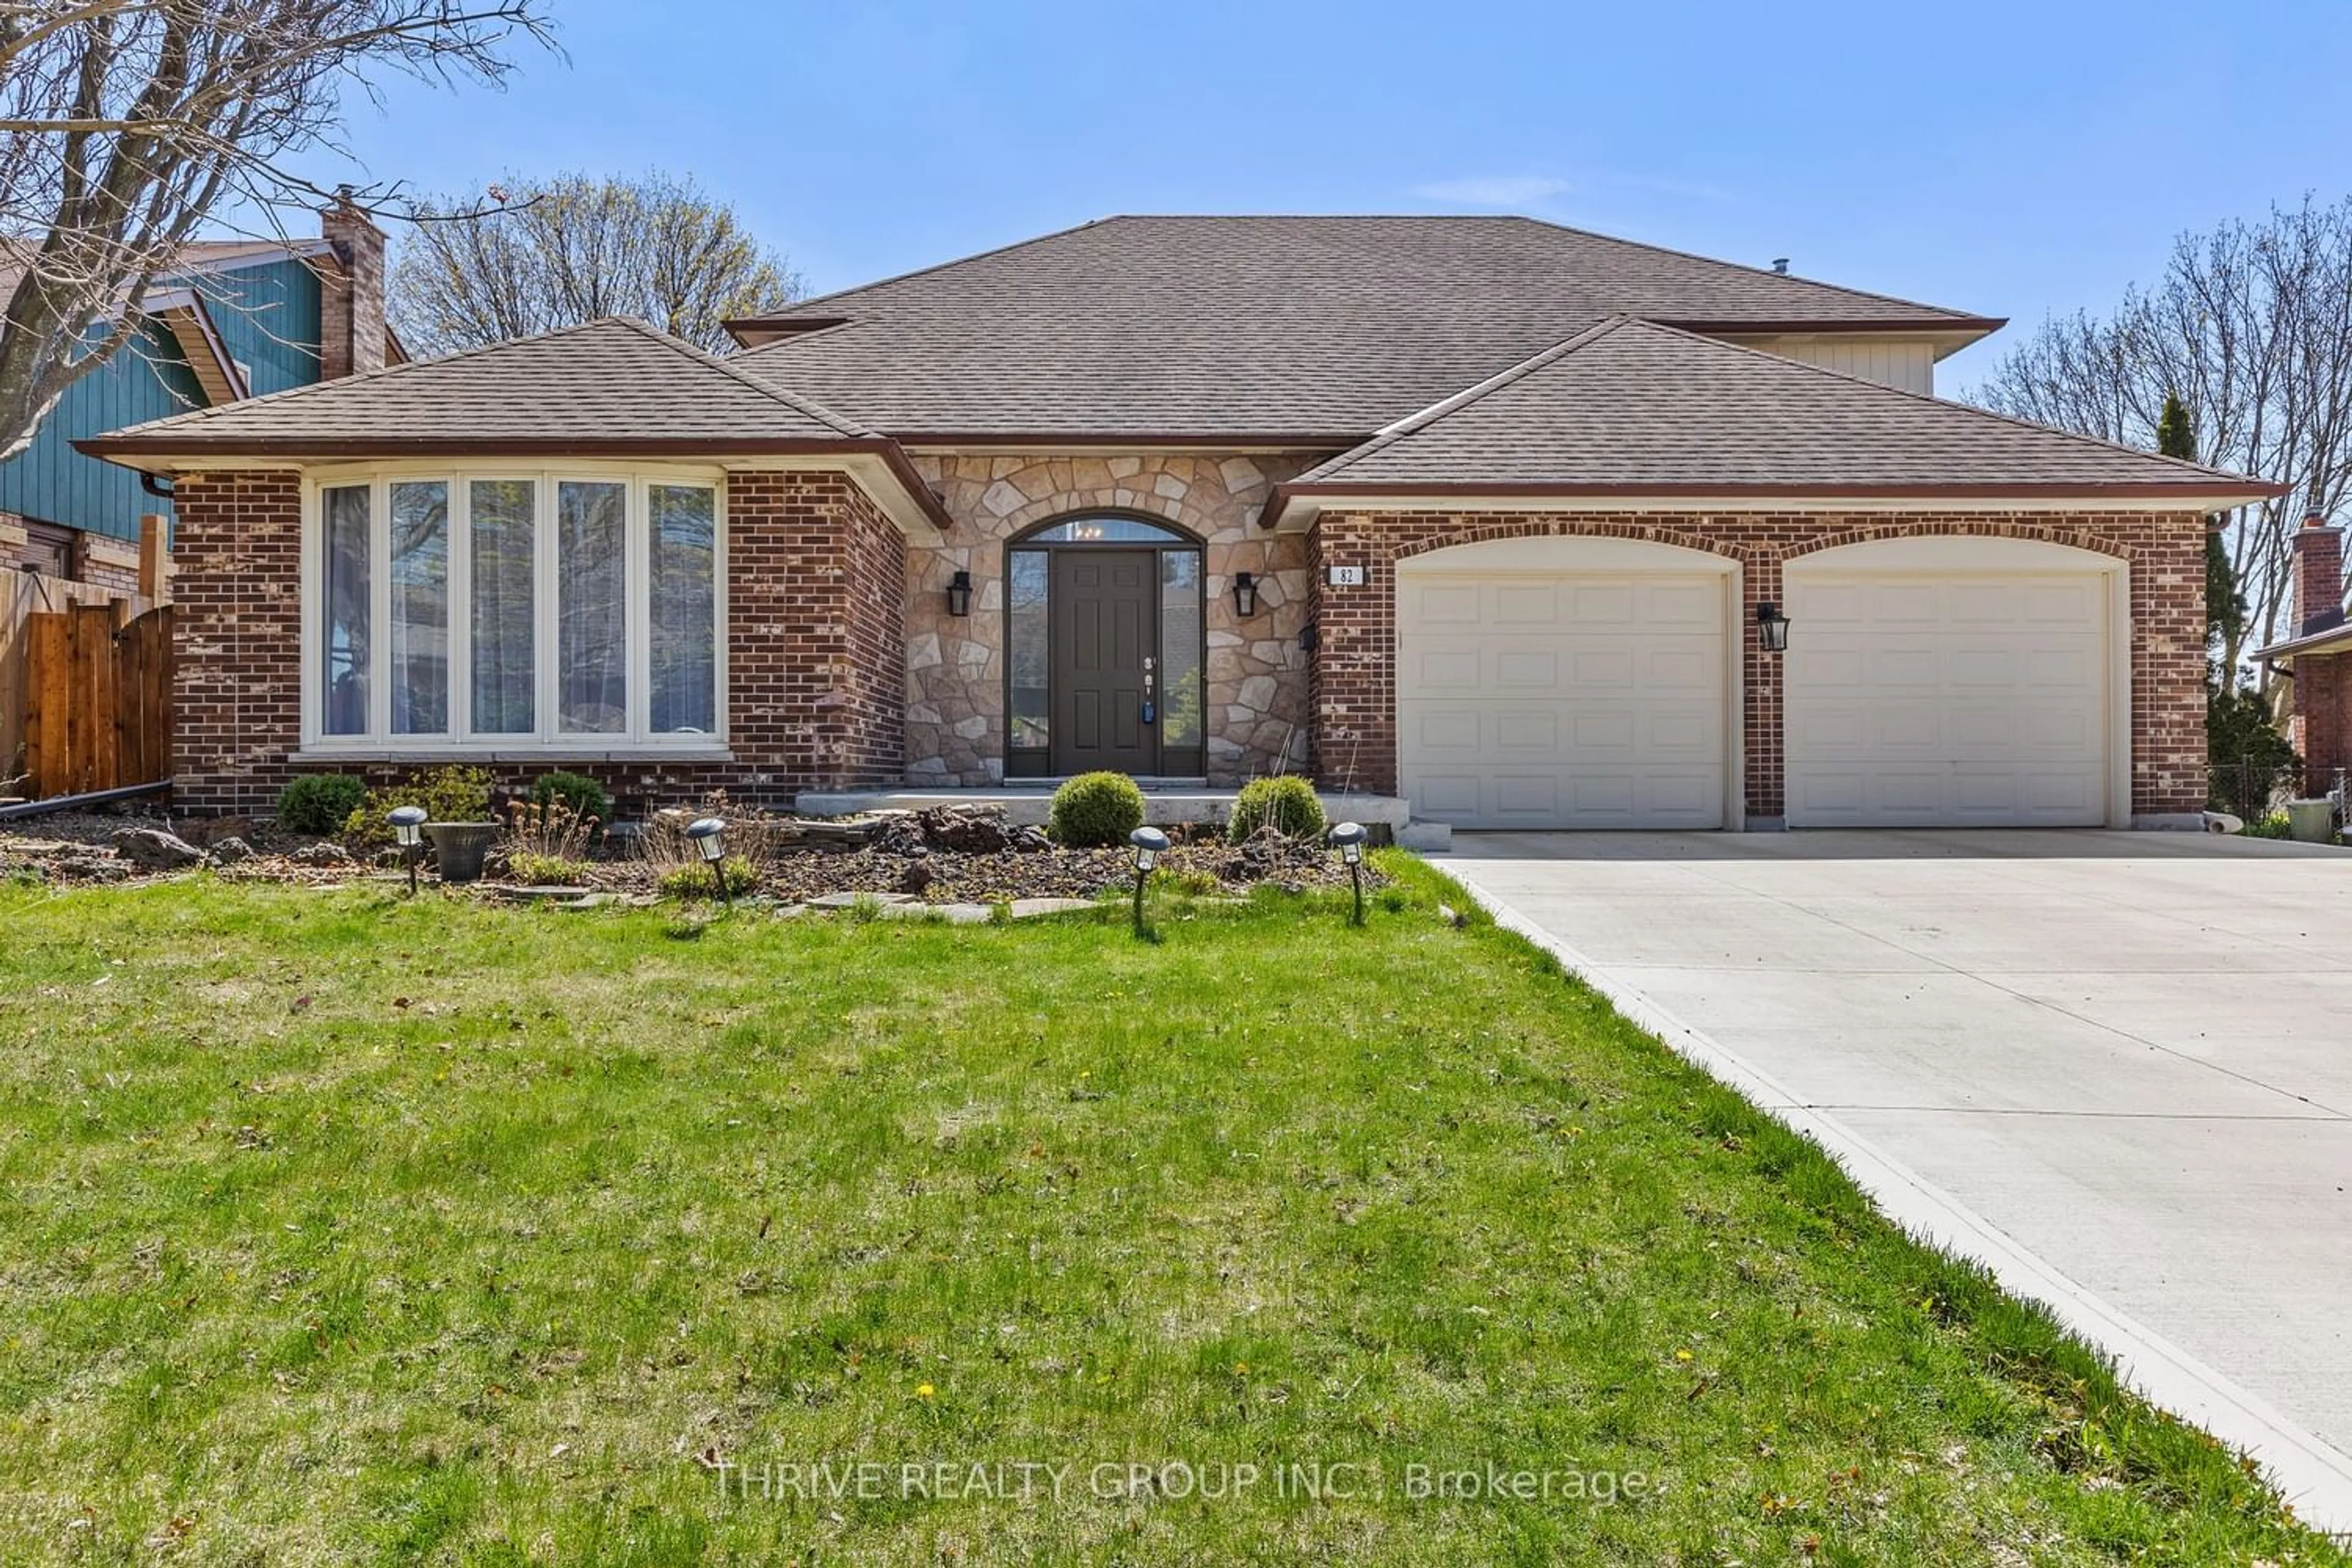 Home with brick exterior material for 82 Fourwinds Pl, London Ontario N6K 3L4